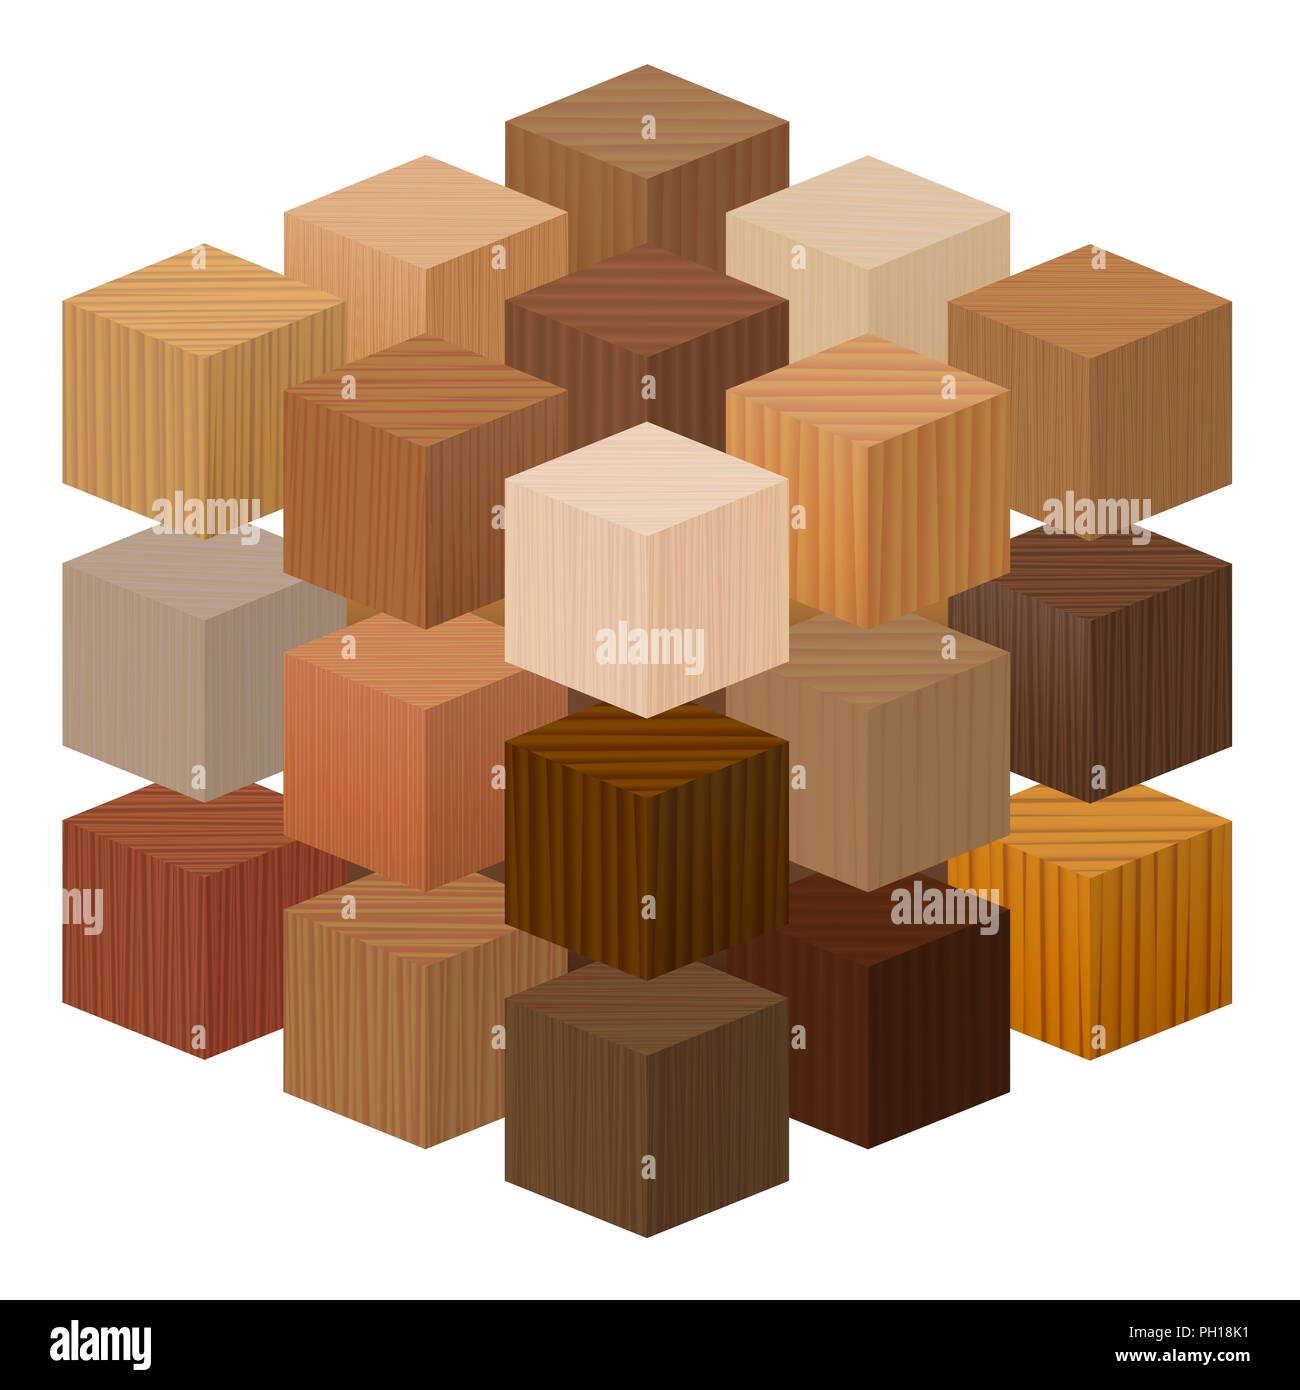 Wooden cubes forming a big artistic carpentry artwork - wood samples with different textures, colors, glazes, from various trees. Stock Photo